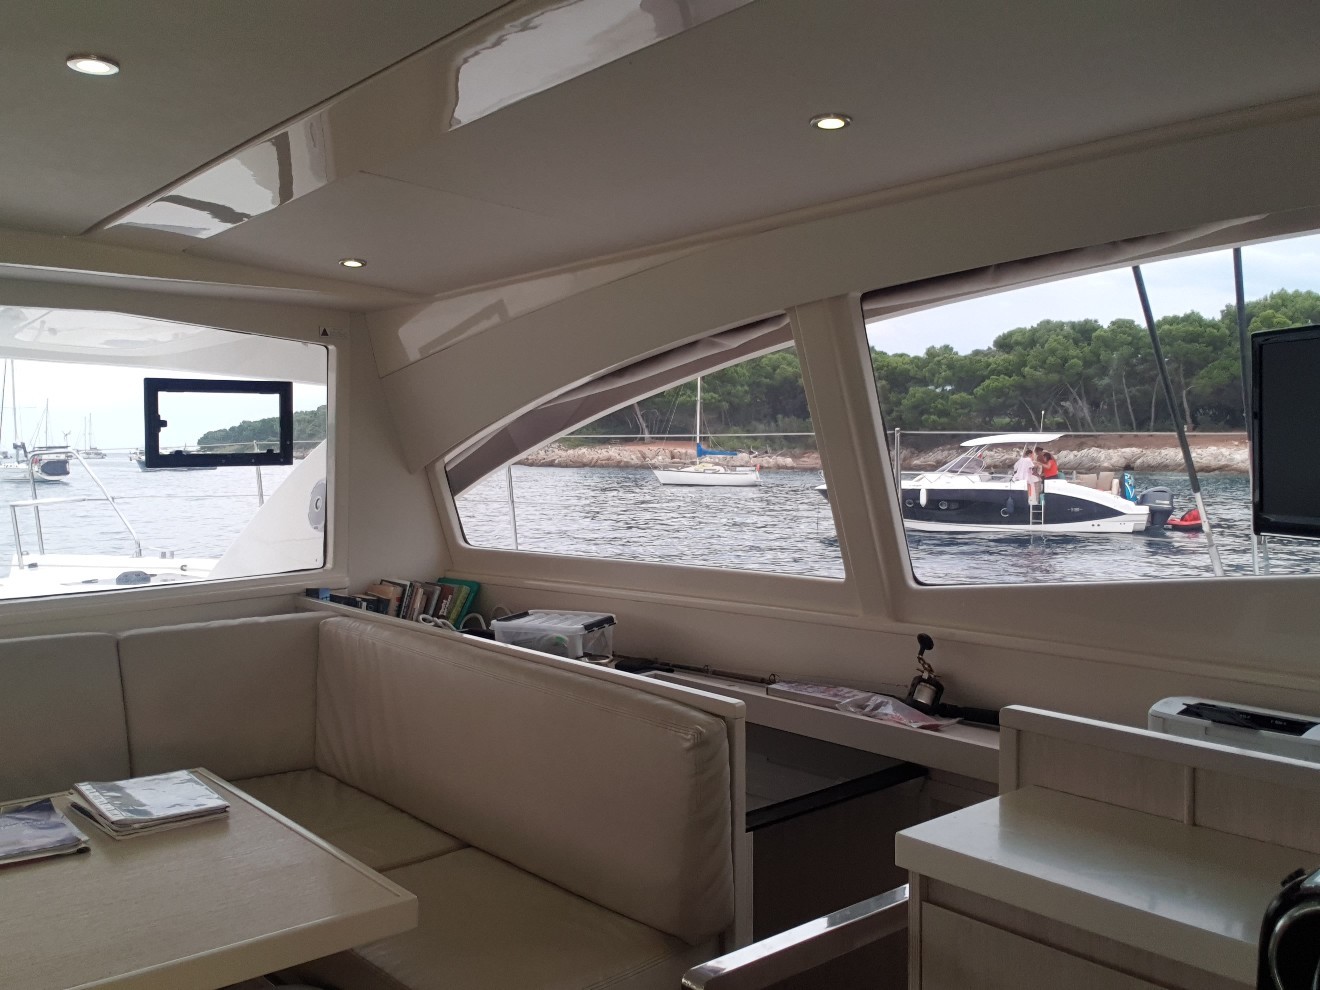 Used Sail Catamaran for Sale 2015 Leopard 48 Layout & Accommodations